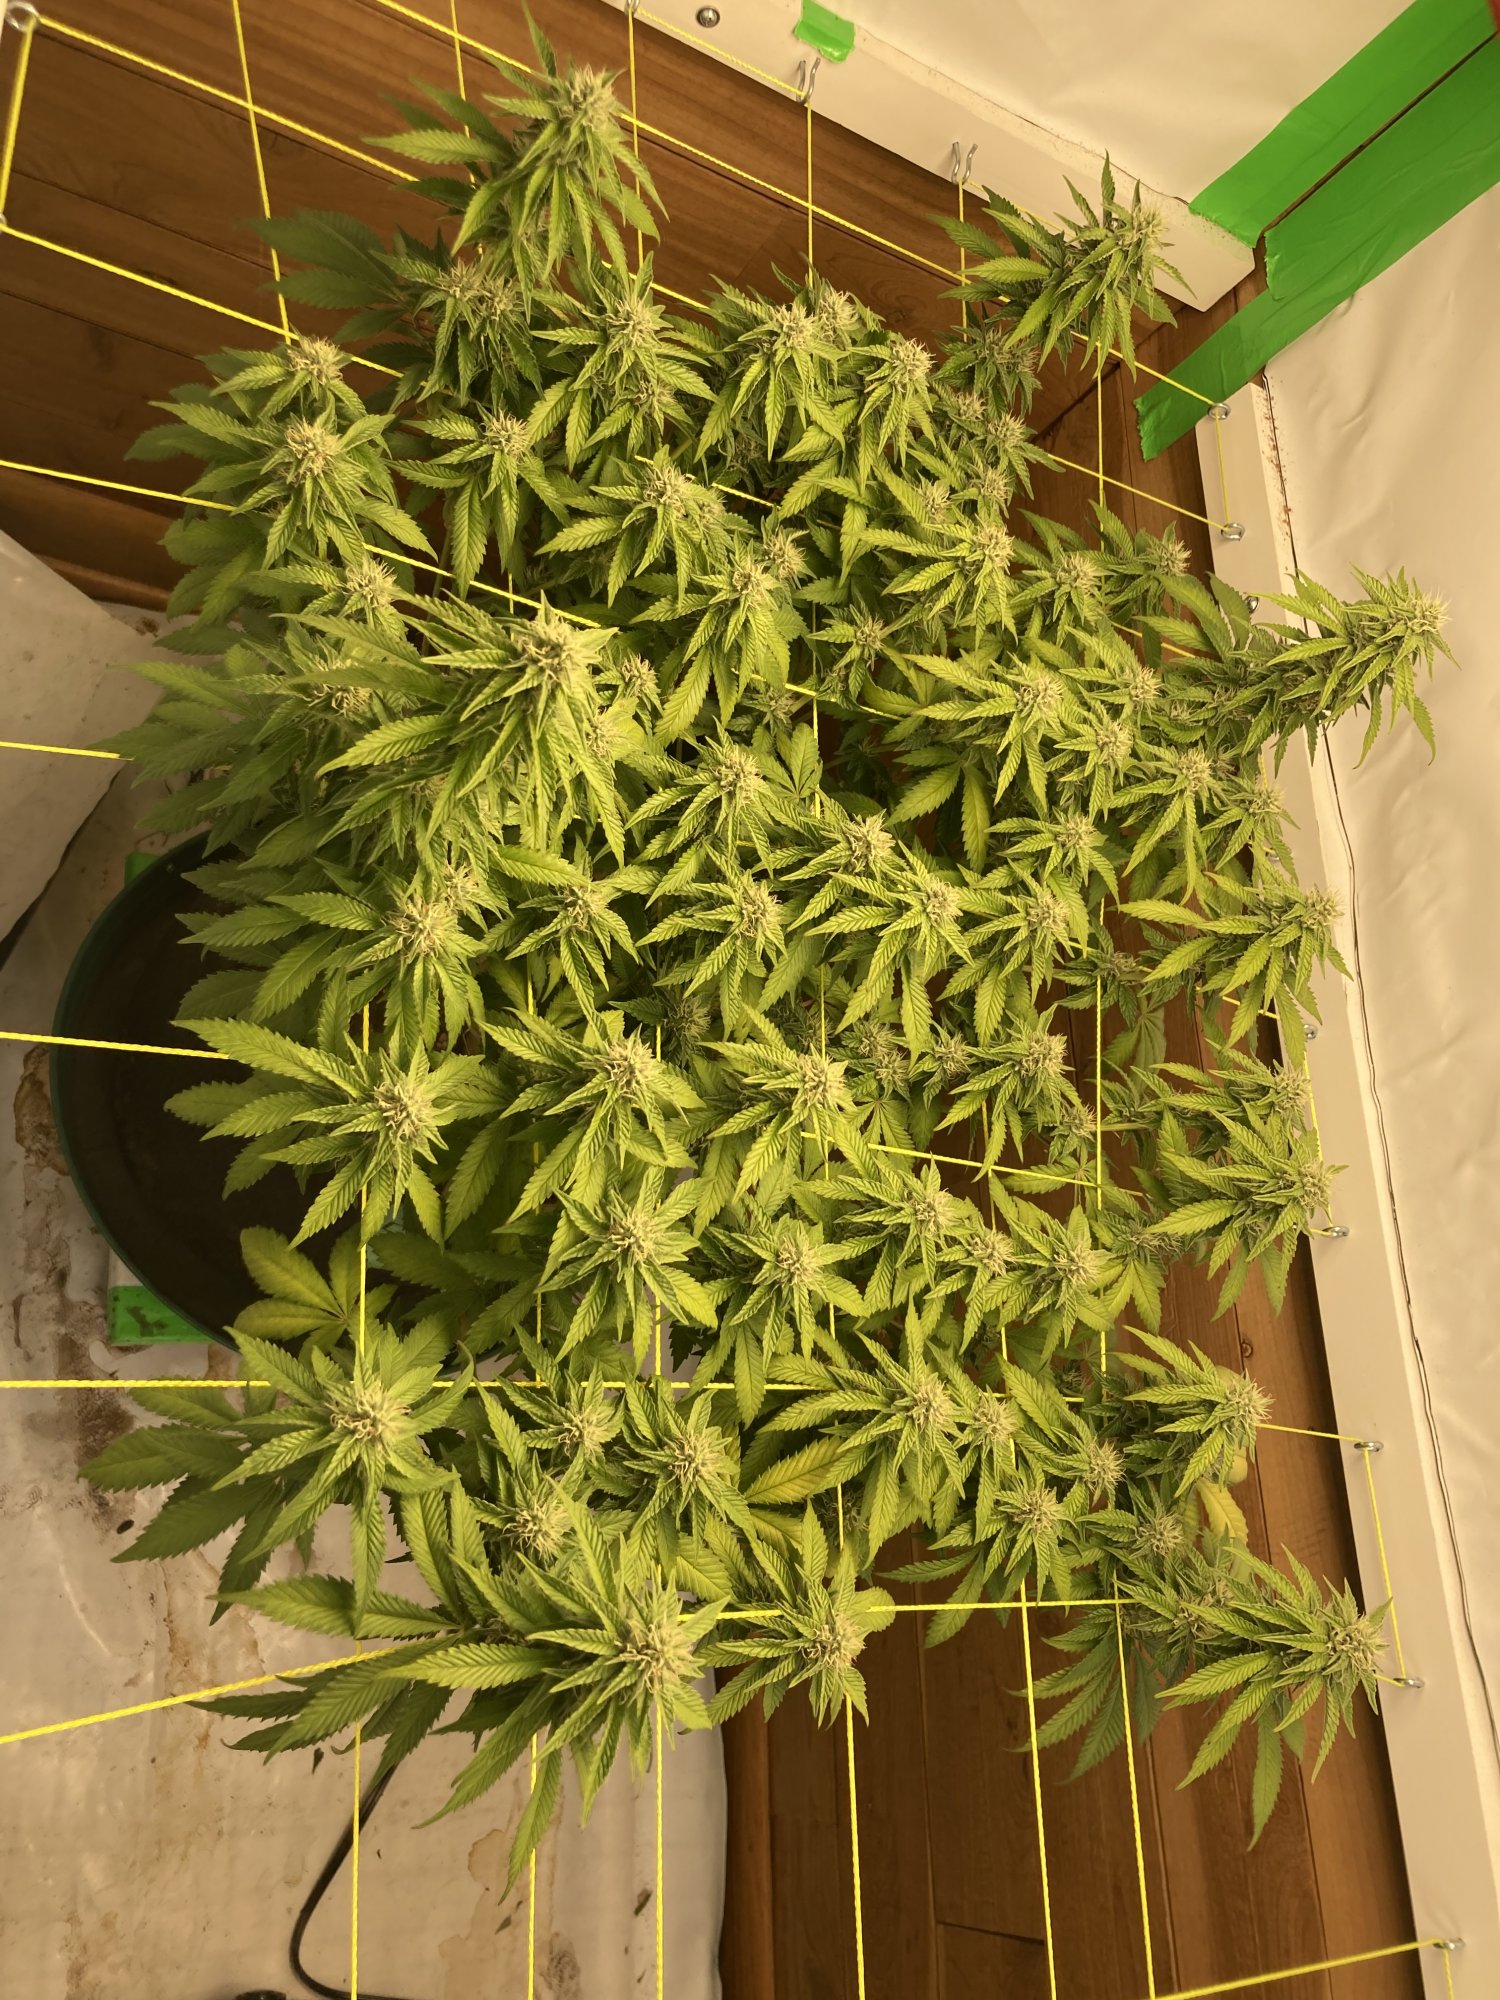 Help me pinpoint which deficiency problem 2